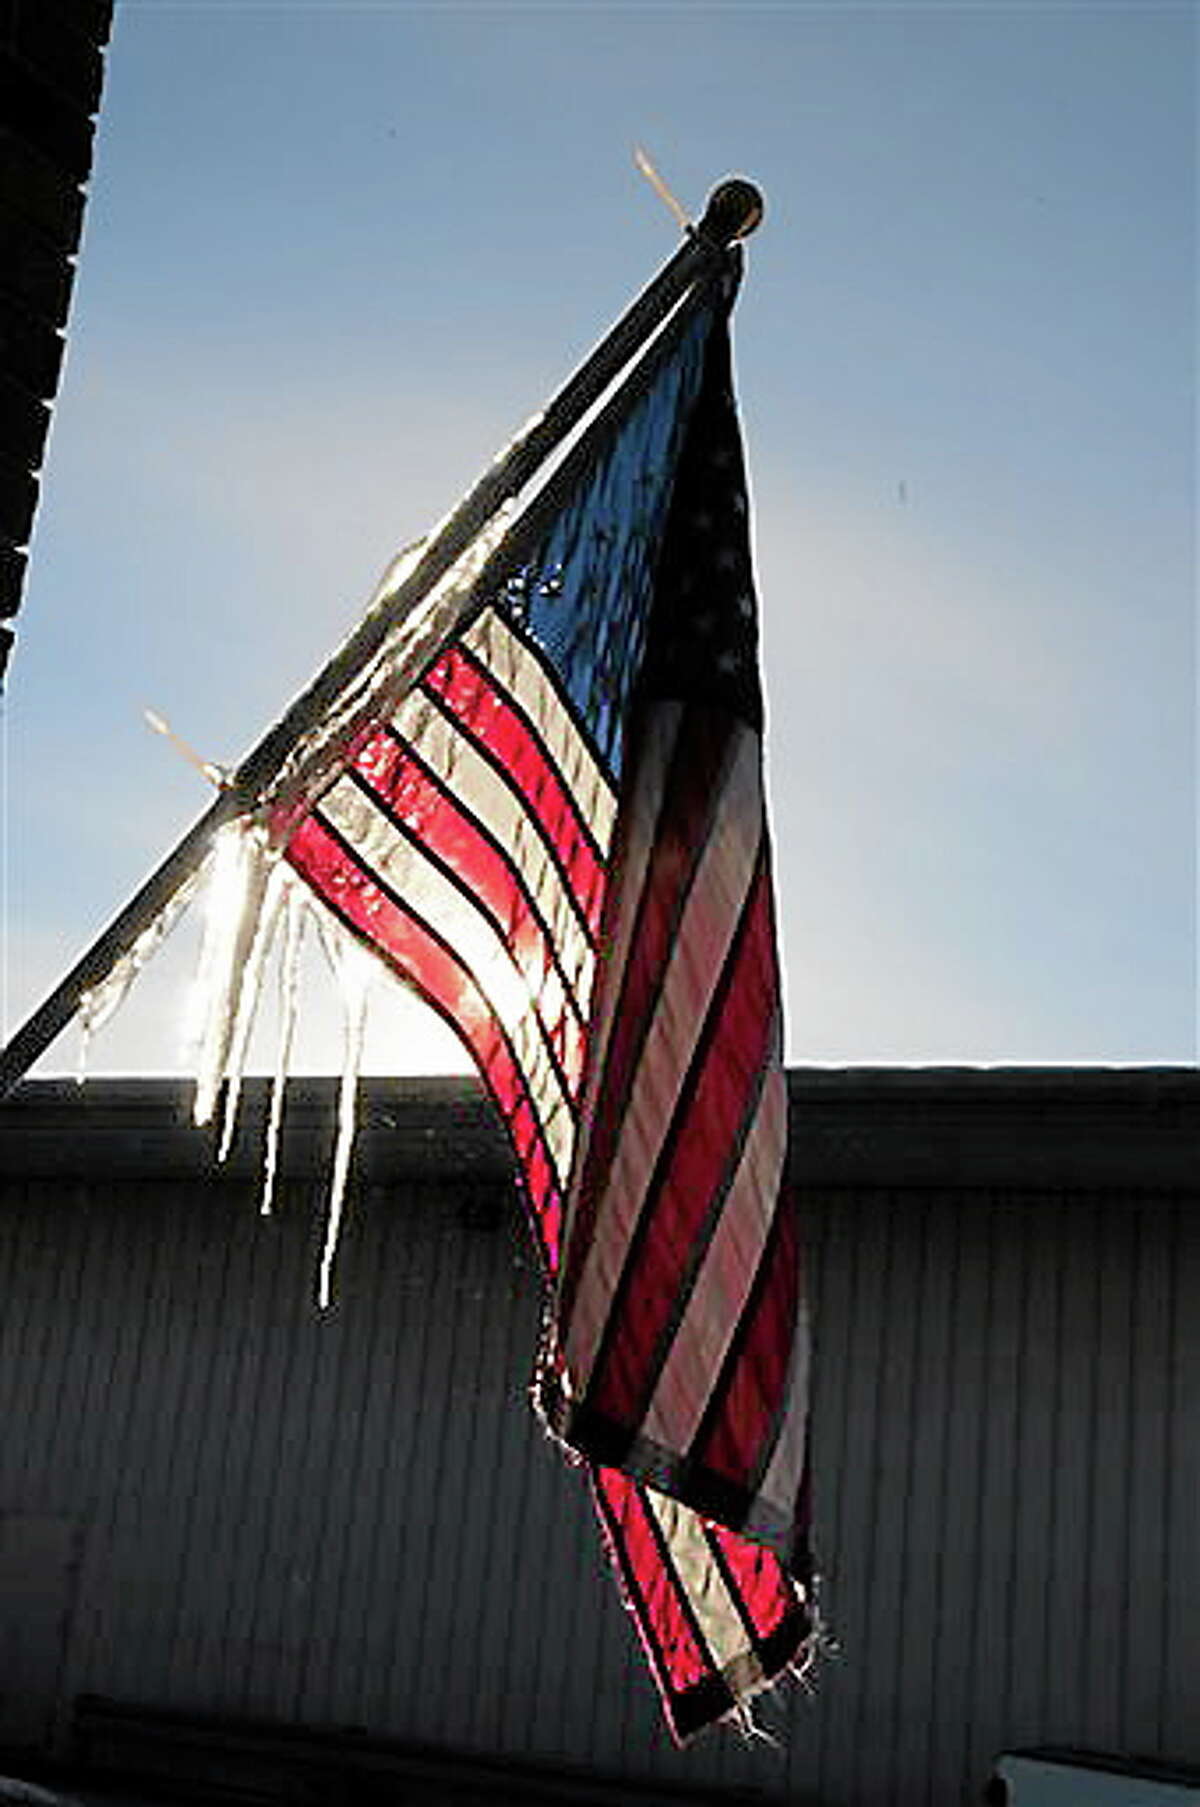 Icicles form on a U.S. flag located under melting snow on the roof of a store in Baxter, Minn. on Wednesday, Dec. 26, 2012. Cold temperatures are beginning to ease in Central Minnesota after a Christmas holiday with temperatures dipping below zero. (AP Photo/Brainerd Dispatch, Steve Kohls)